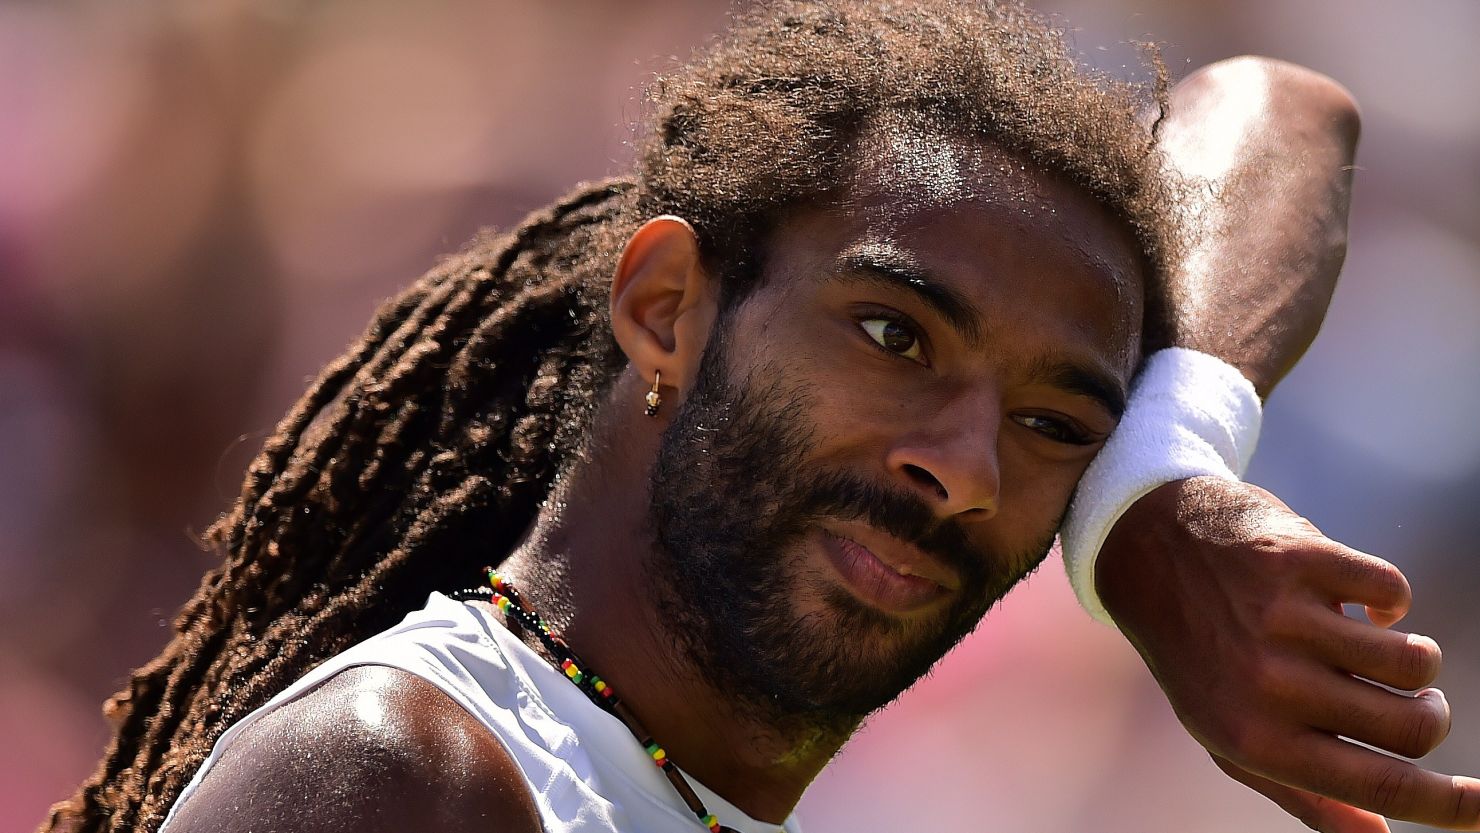 Feeling the heat: Germany's Dustin Brown on his way to a third round defeat to Viktor Troicki of Serbia at Wimbledon.